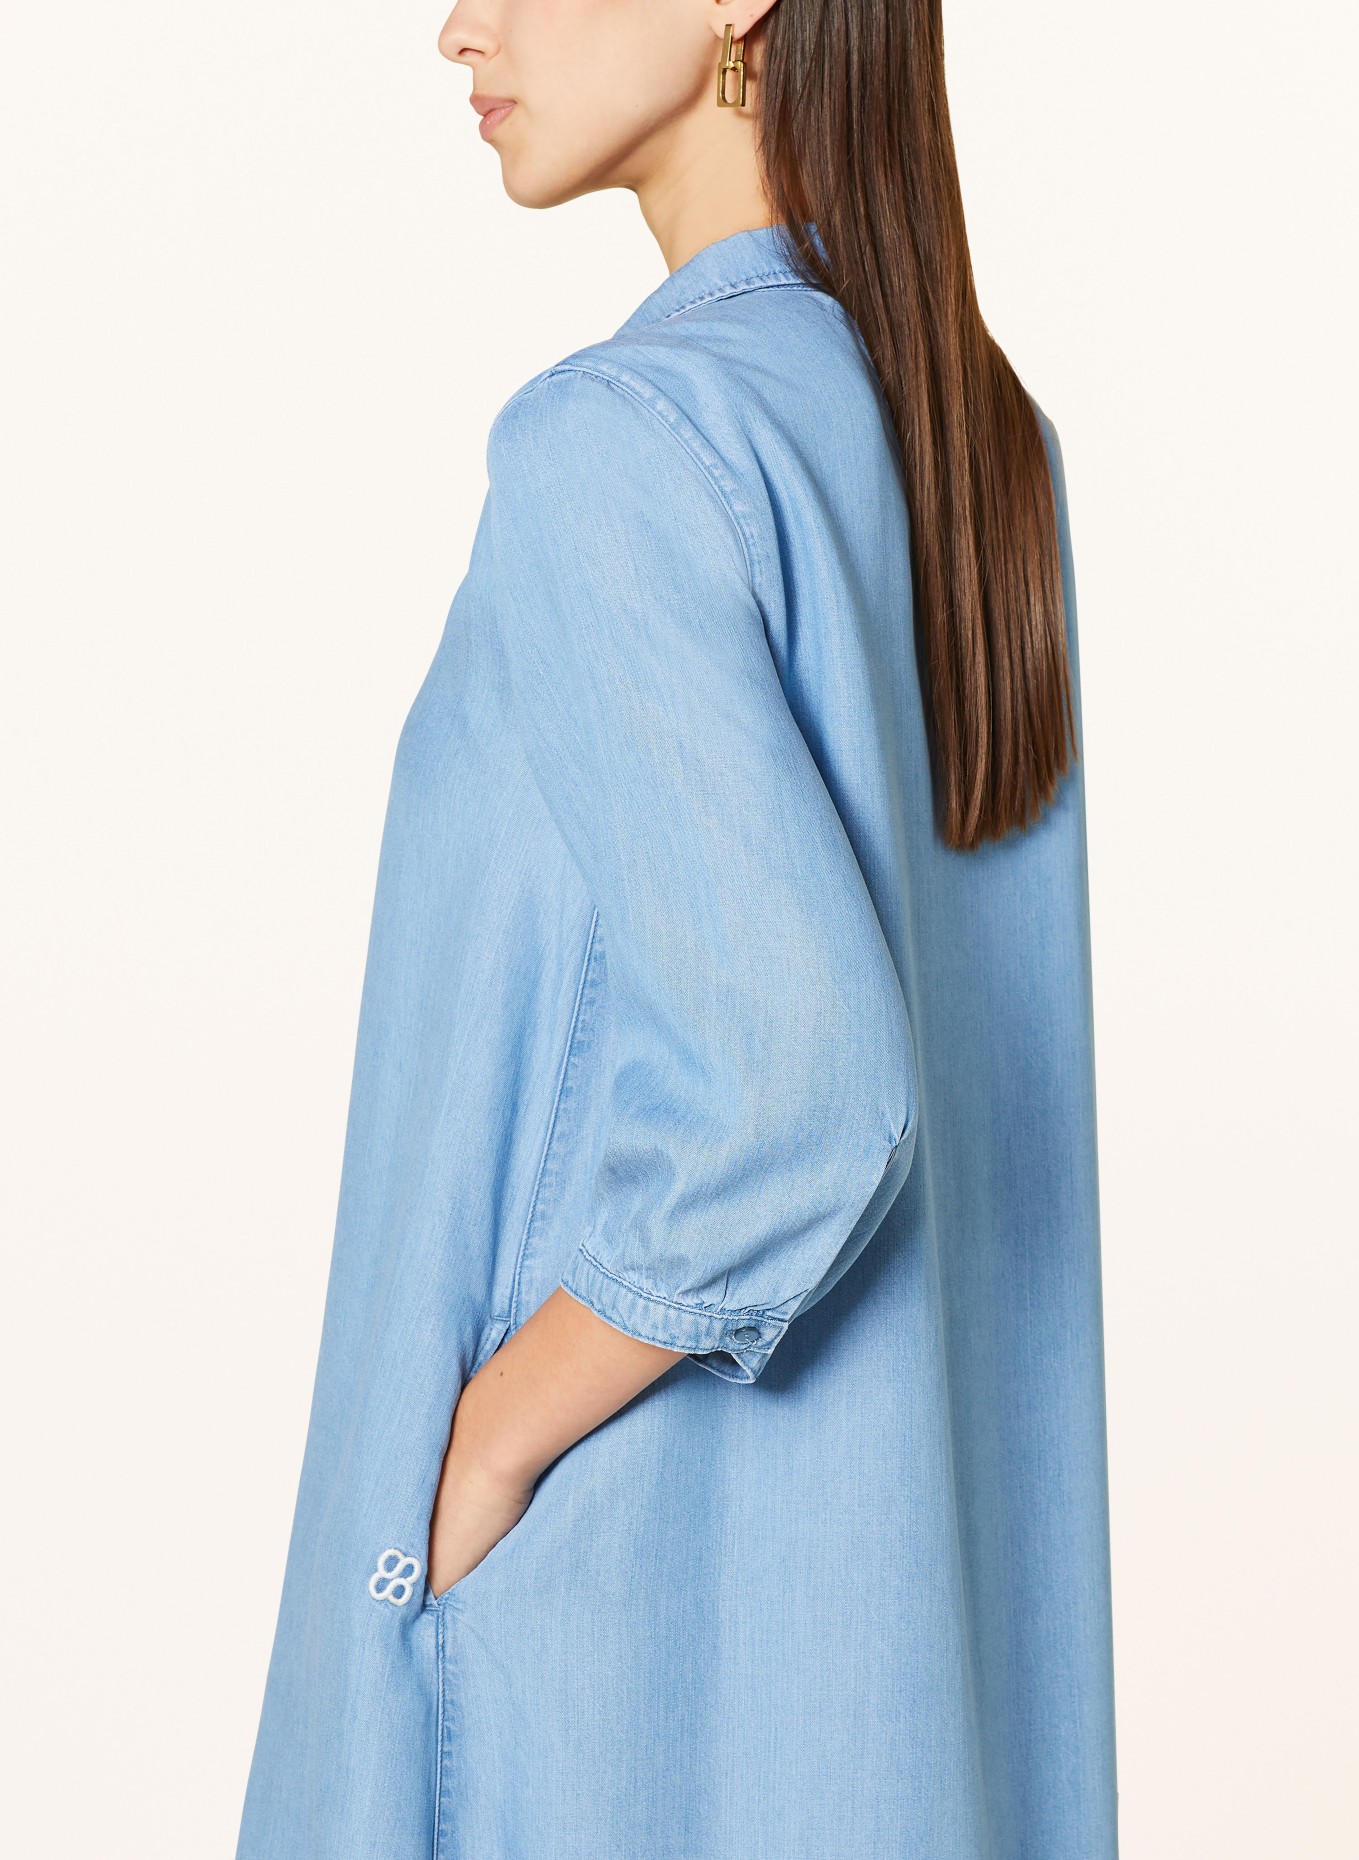 Smith & Soul Shirt dress in denim look with 3/4 sleeves, Color: LIGHT BLUE (Image 4)